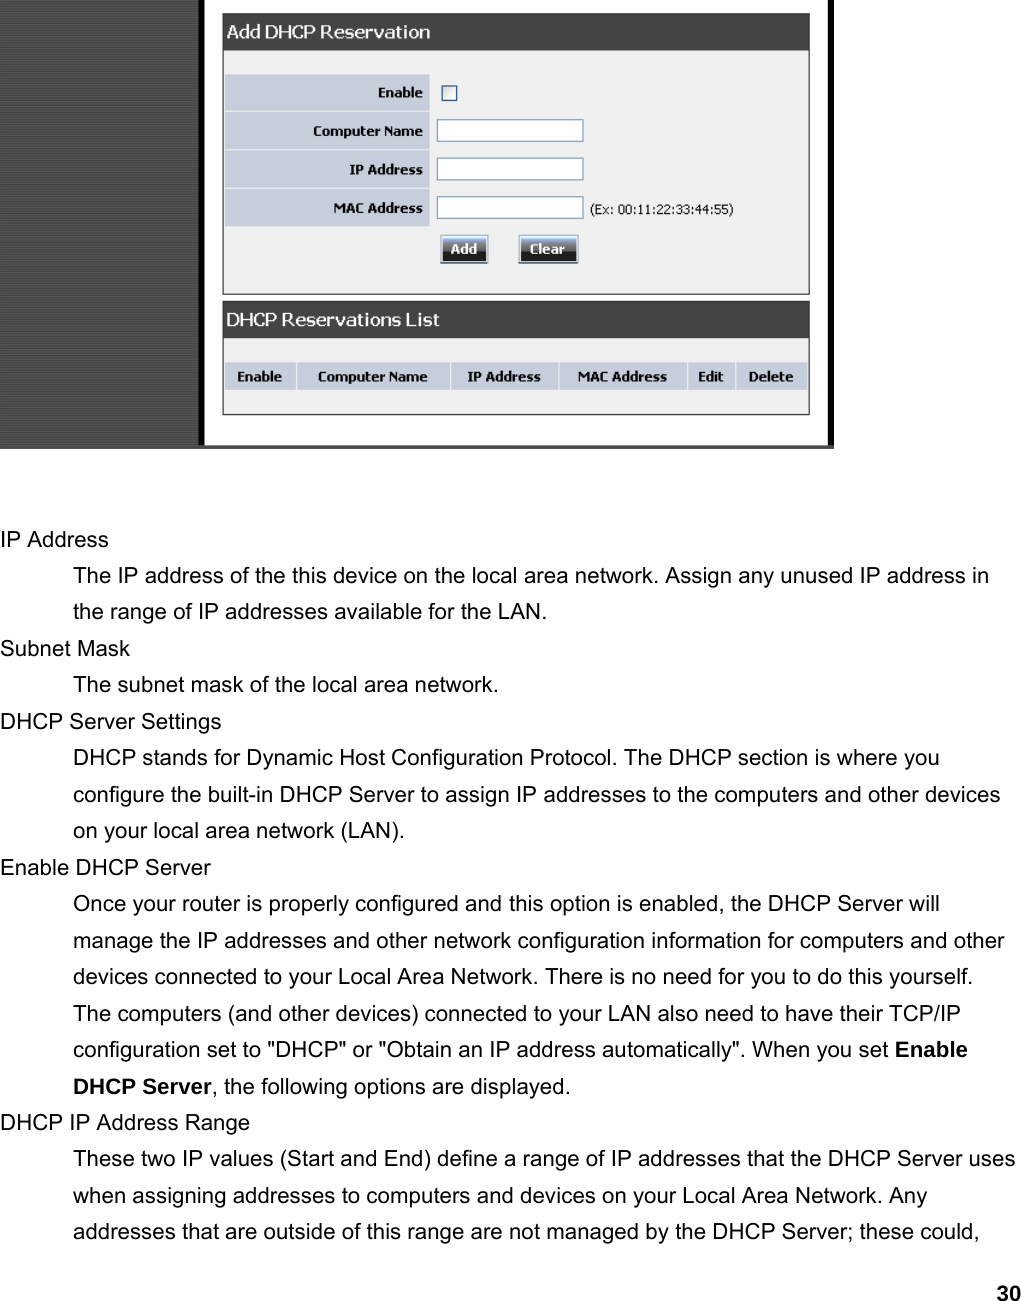 30   IP Address   The IP address of the this device on the local area network. Assign any unused IP address in the range of IP addresses available for the LAN.   Subnet Mask   The subnet mask of the local area network.   DHCP Server Settings   DHCP stands for Dynamic Host Configuration Protocol. The DHCP section is where you configure the built-in DHCP Server to assign IP addresses to the computers and other devices on your local area network (LAN).   Enable DHCP Server   Once your router is properly configured and this option is enabled, the DHCP Server will manage the IP addresses and other network configuration information for computers and other devices connected to your Local Area Network. There is no need for you to do this yourself.   The computers (and other devices) connected to your LAN also need to have their TCP/IP configuration set to &quot;DHCP&quot; or &quot;Obtain an IP address automatically&quot;. When you set Enable DHCP Server, the following options are displayed.   DHCP IP Address Range   These two IP values (Start and End) define a range of IP addresses that the DHCP Server uses when assigning addresses to computers and devices on your Local Area Network. Any addresses that are outside of this range are not managed by the DHCP Server; these could, 